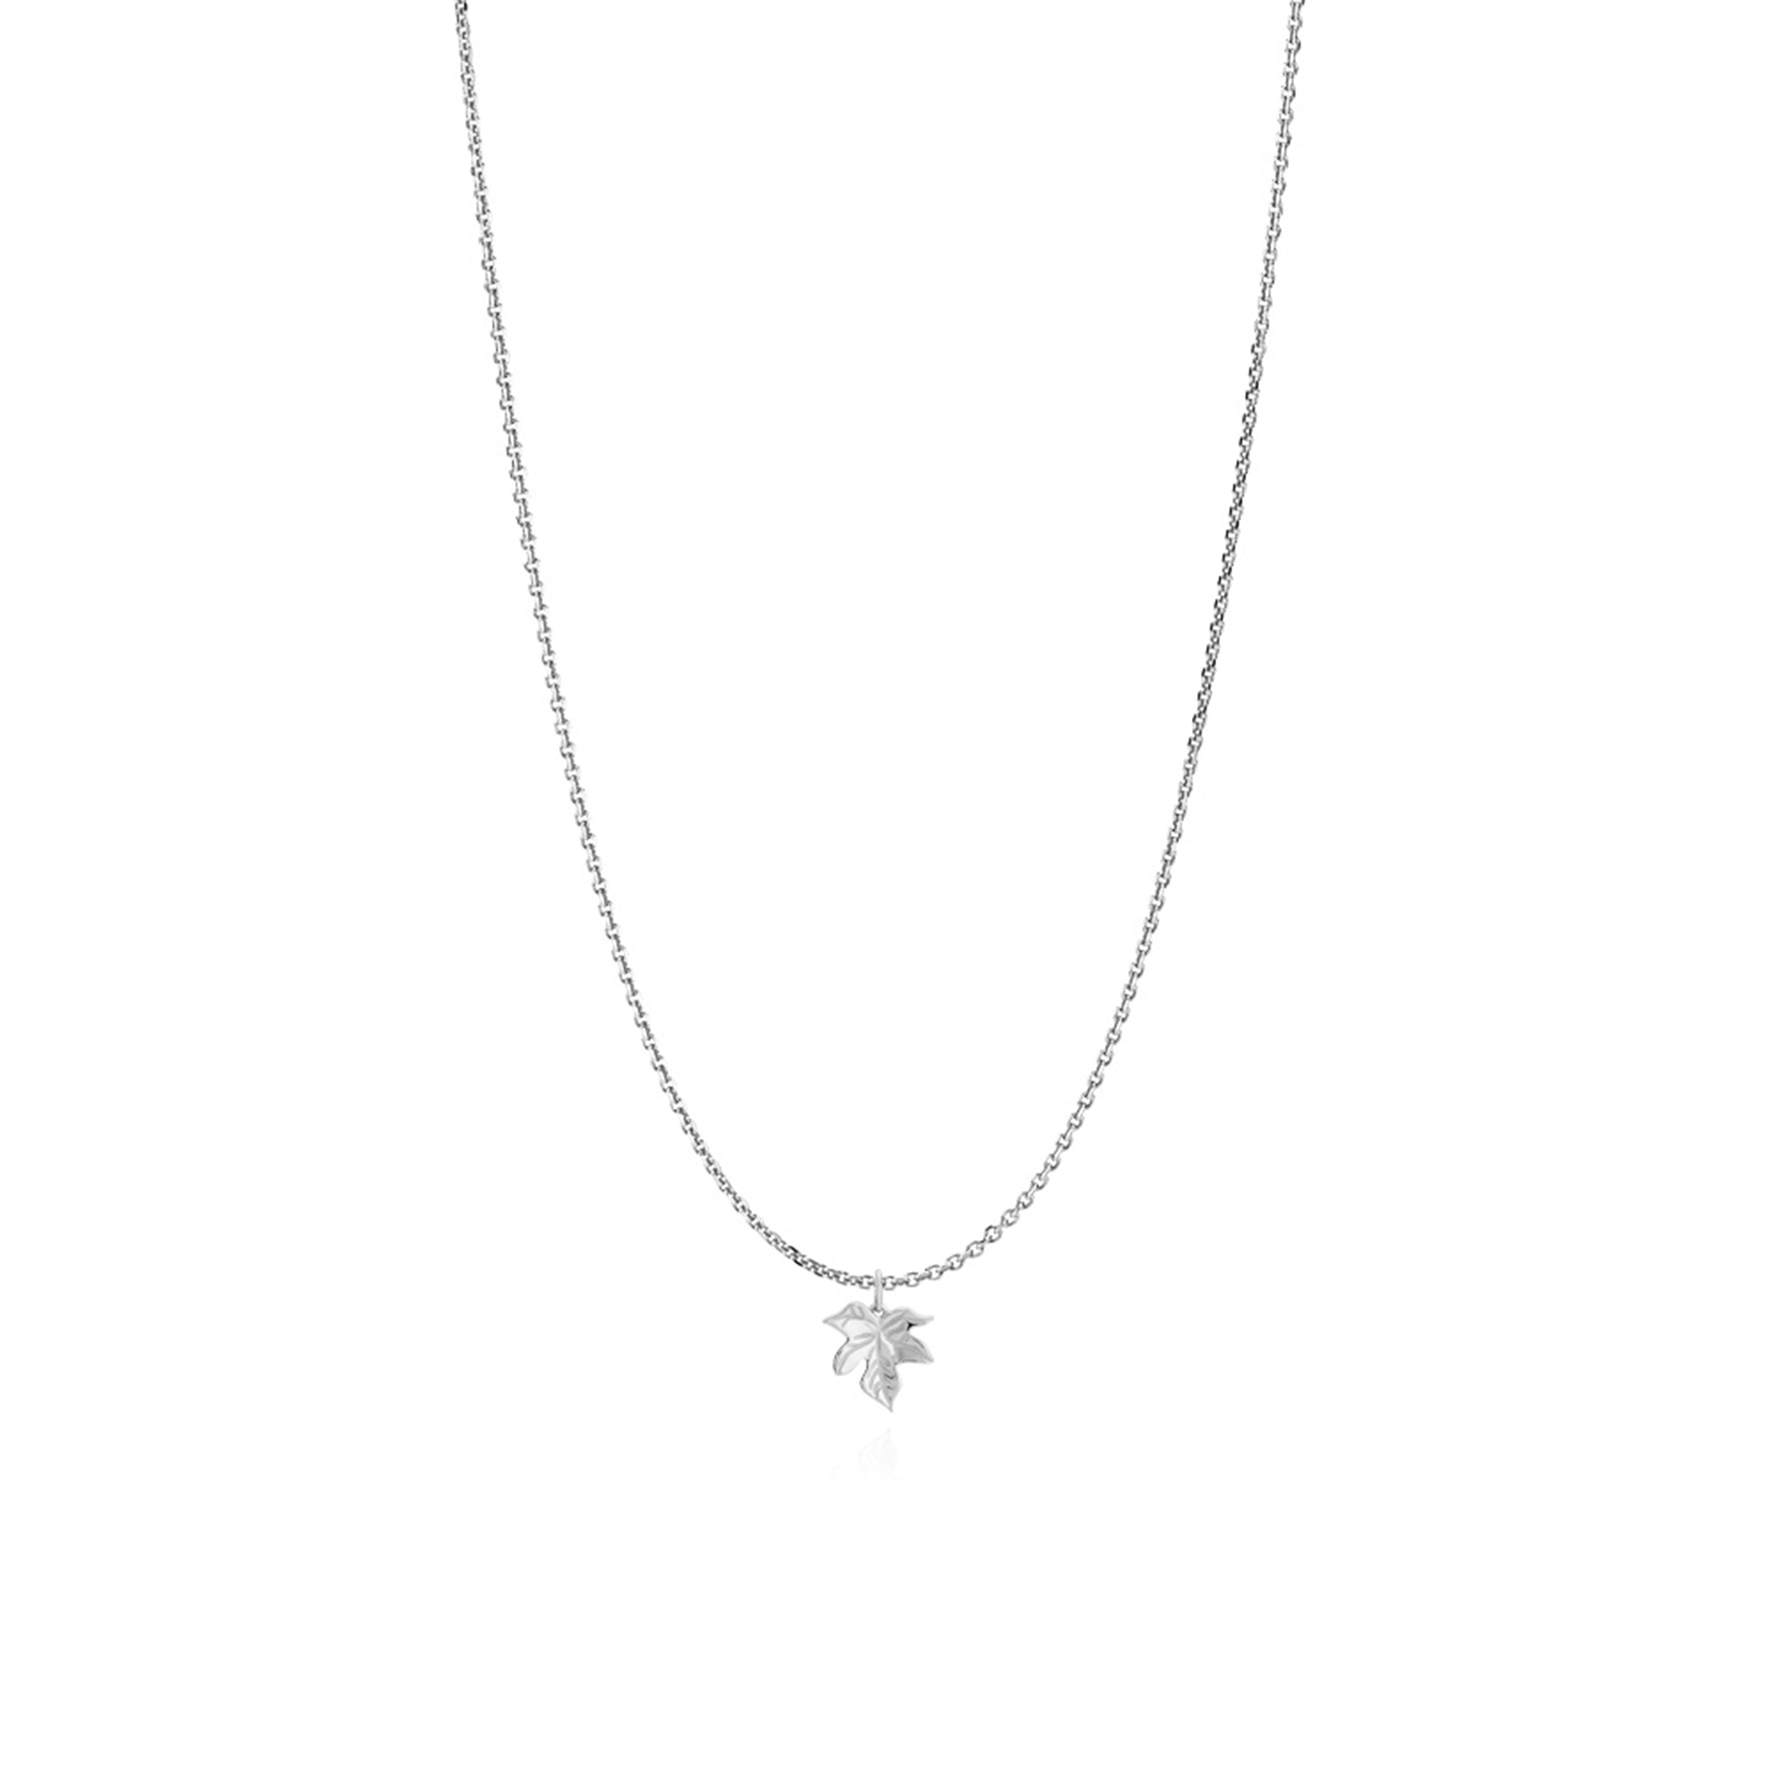 Caley Necklace With Leaf from Izabel Camille in Silver Sterling 925